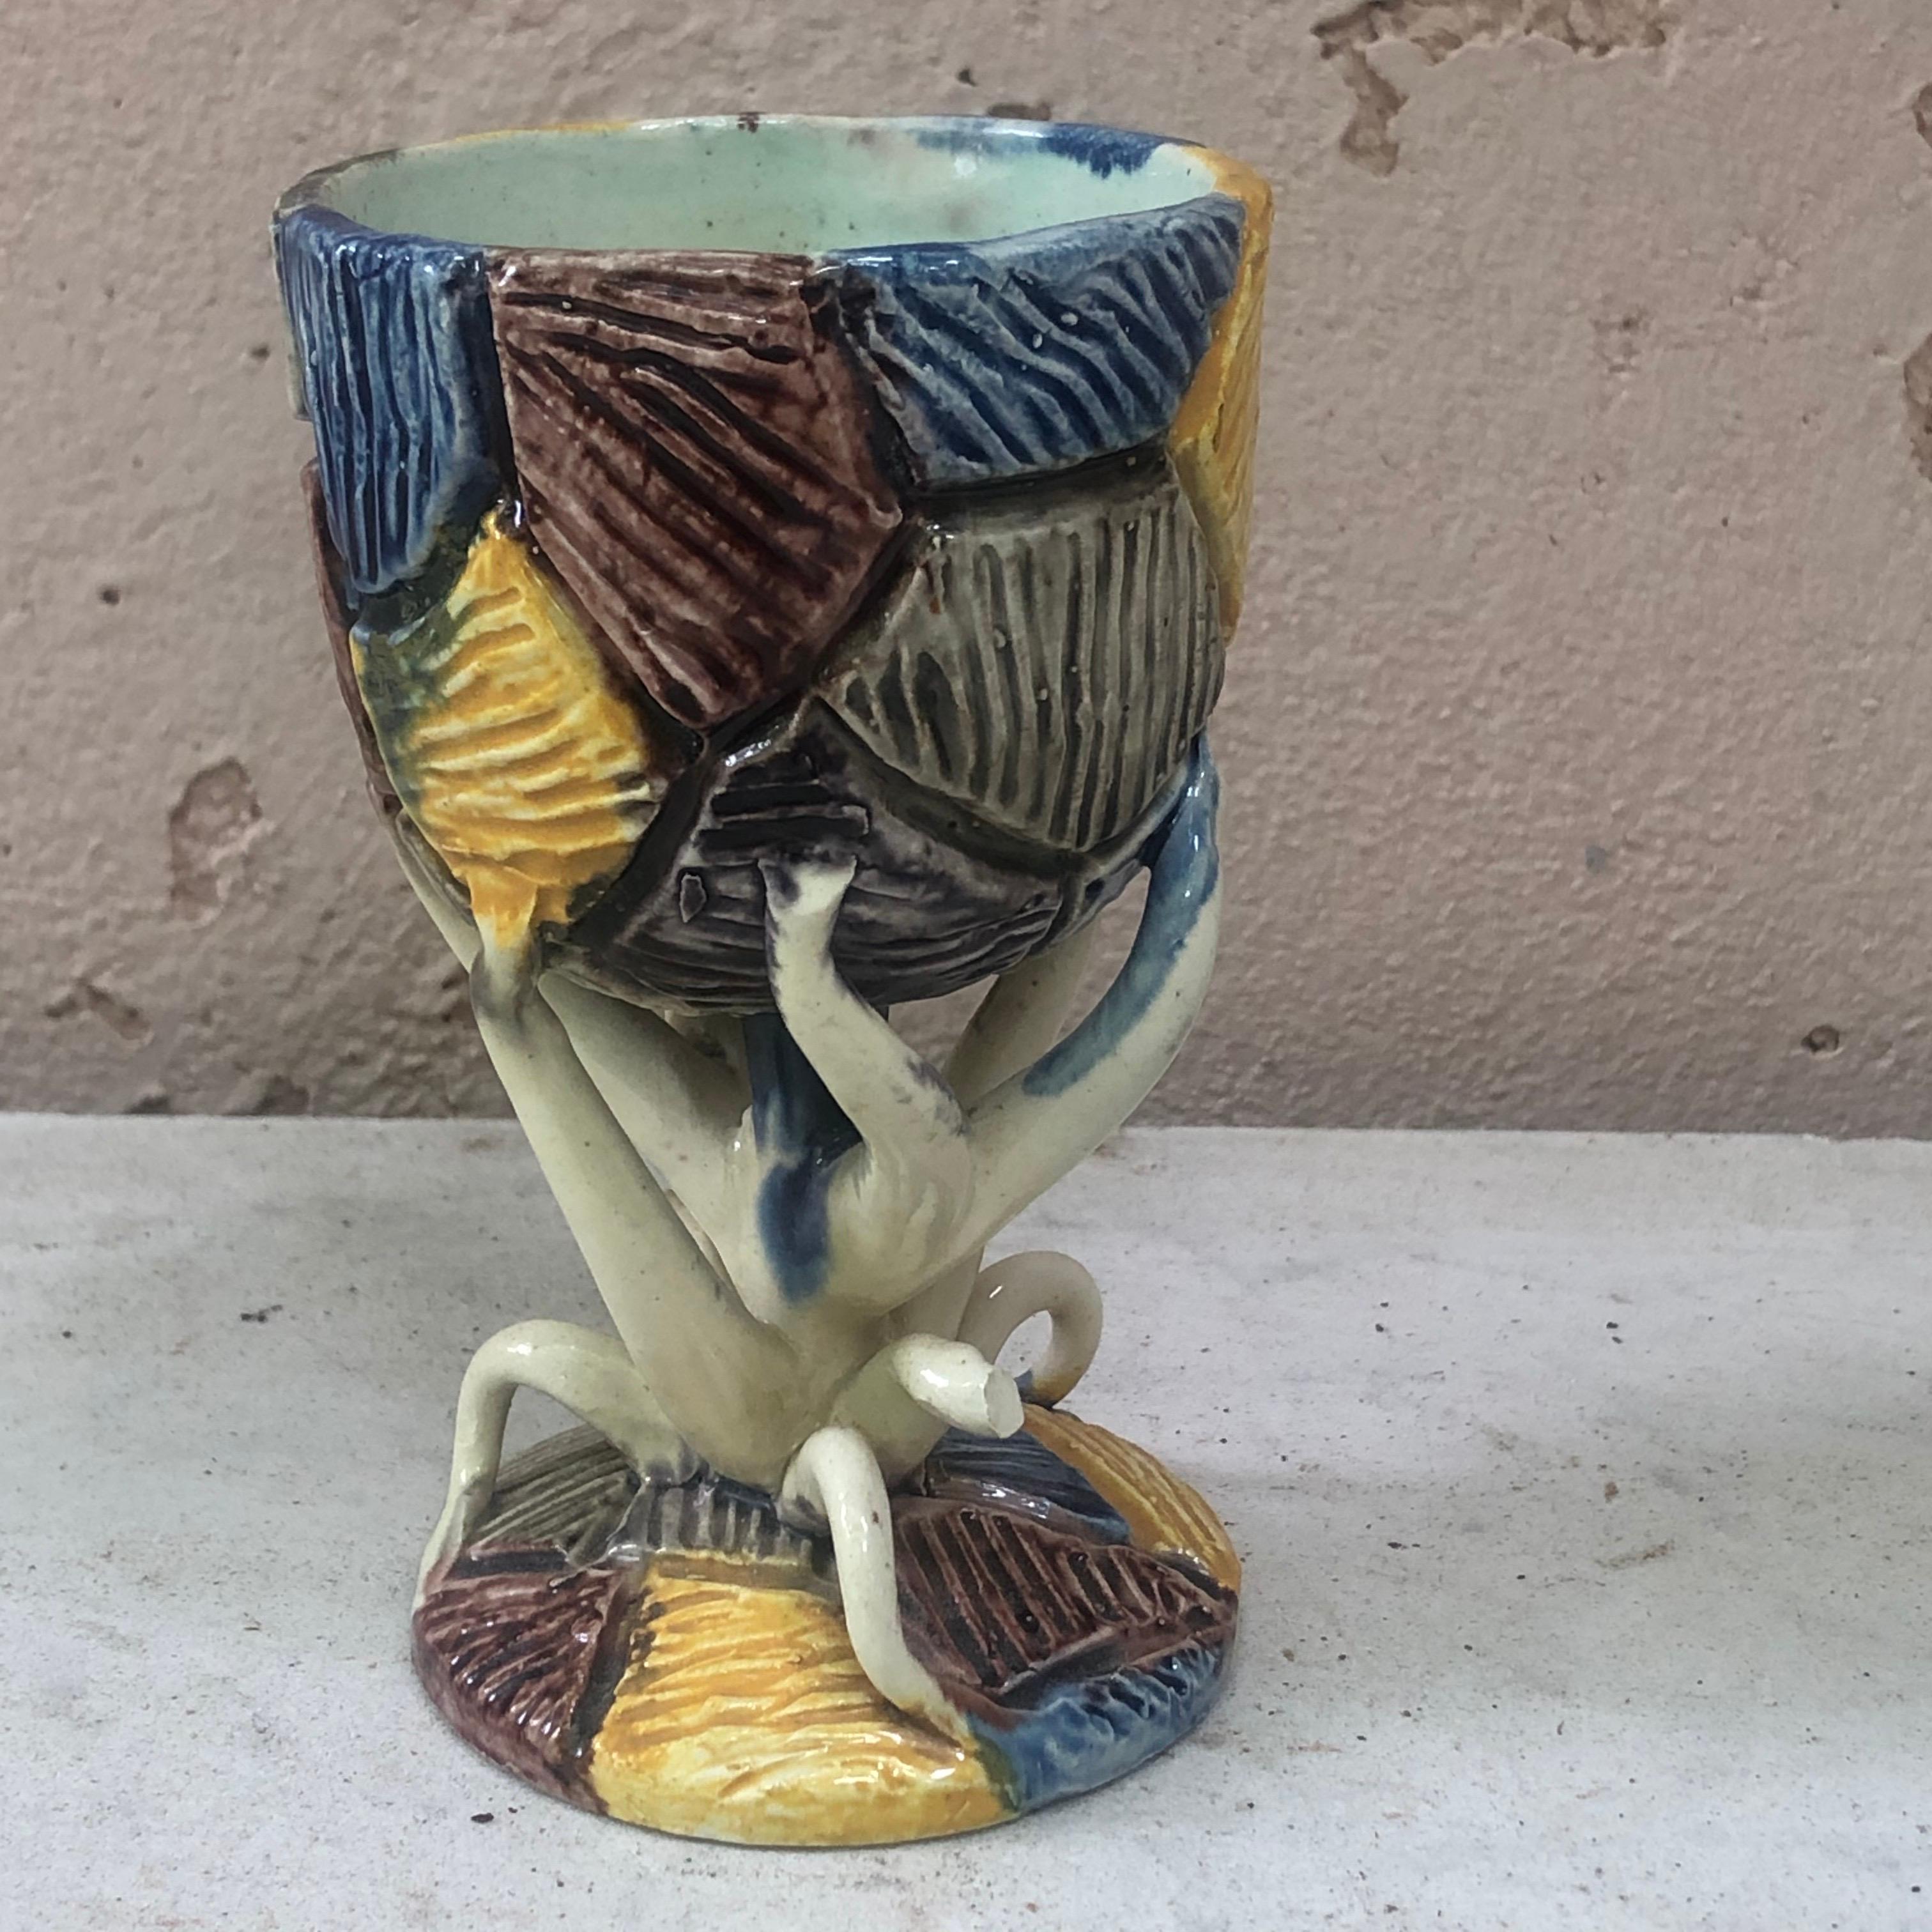 19th century Palissy chalice vase signed Thomas Sergent, the feets are stylized with seaweeds in a Renaissance style.
School of Paris.
The School of Paris was composed by makers as Victor Barbizet, Francois Maurice, Thomas Sergent, Georges Pull,